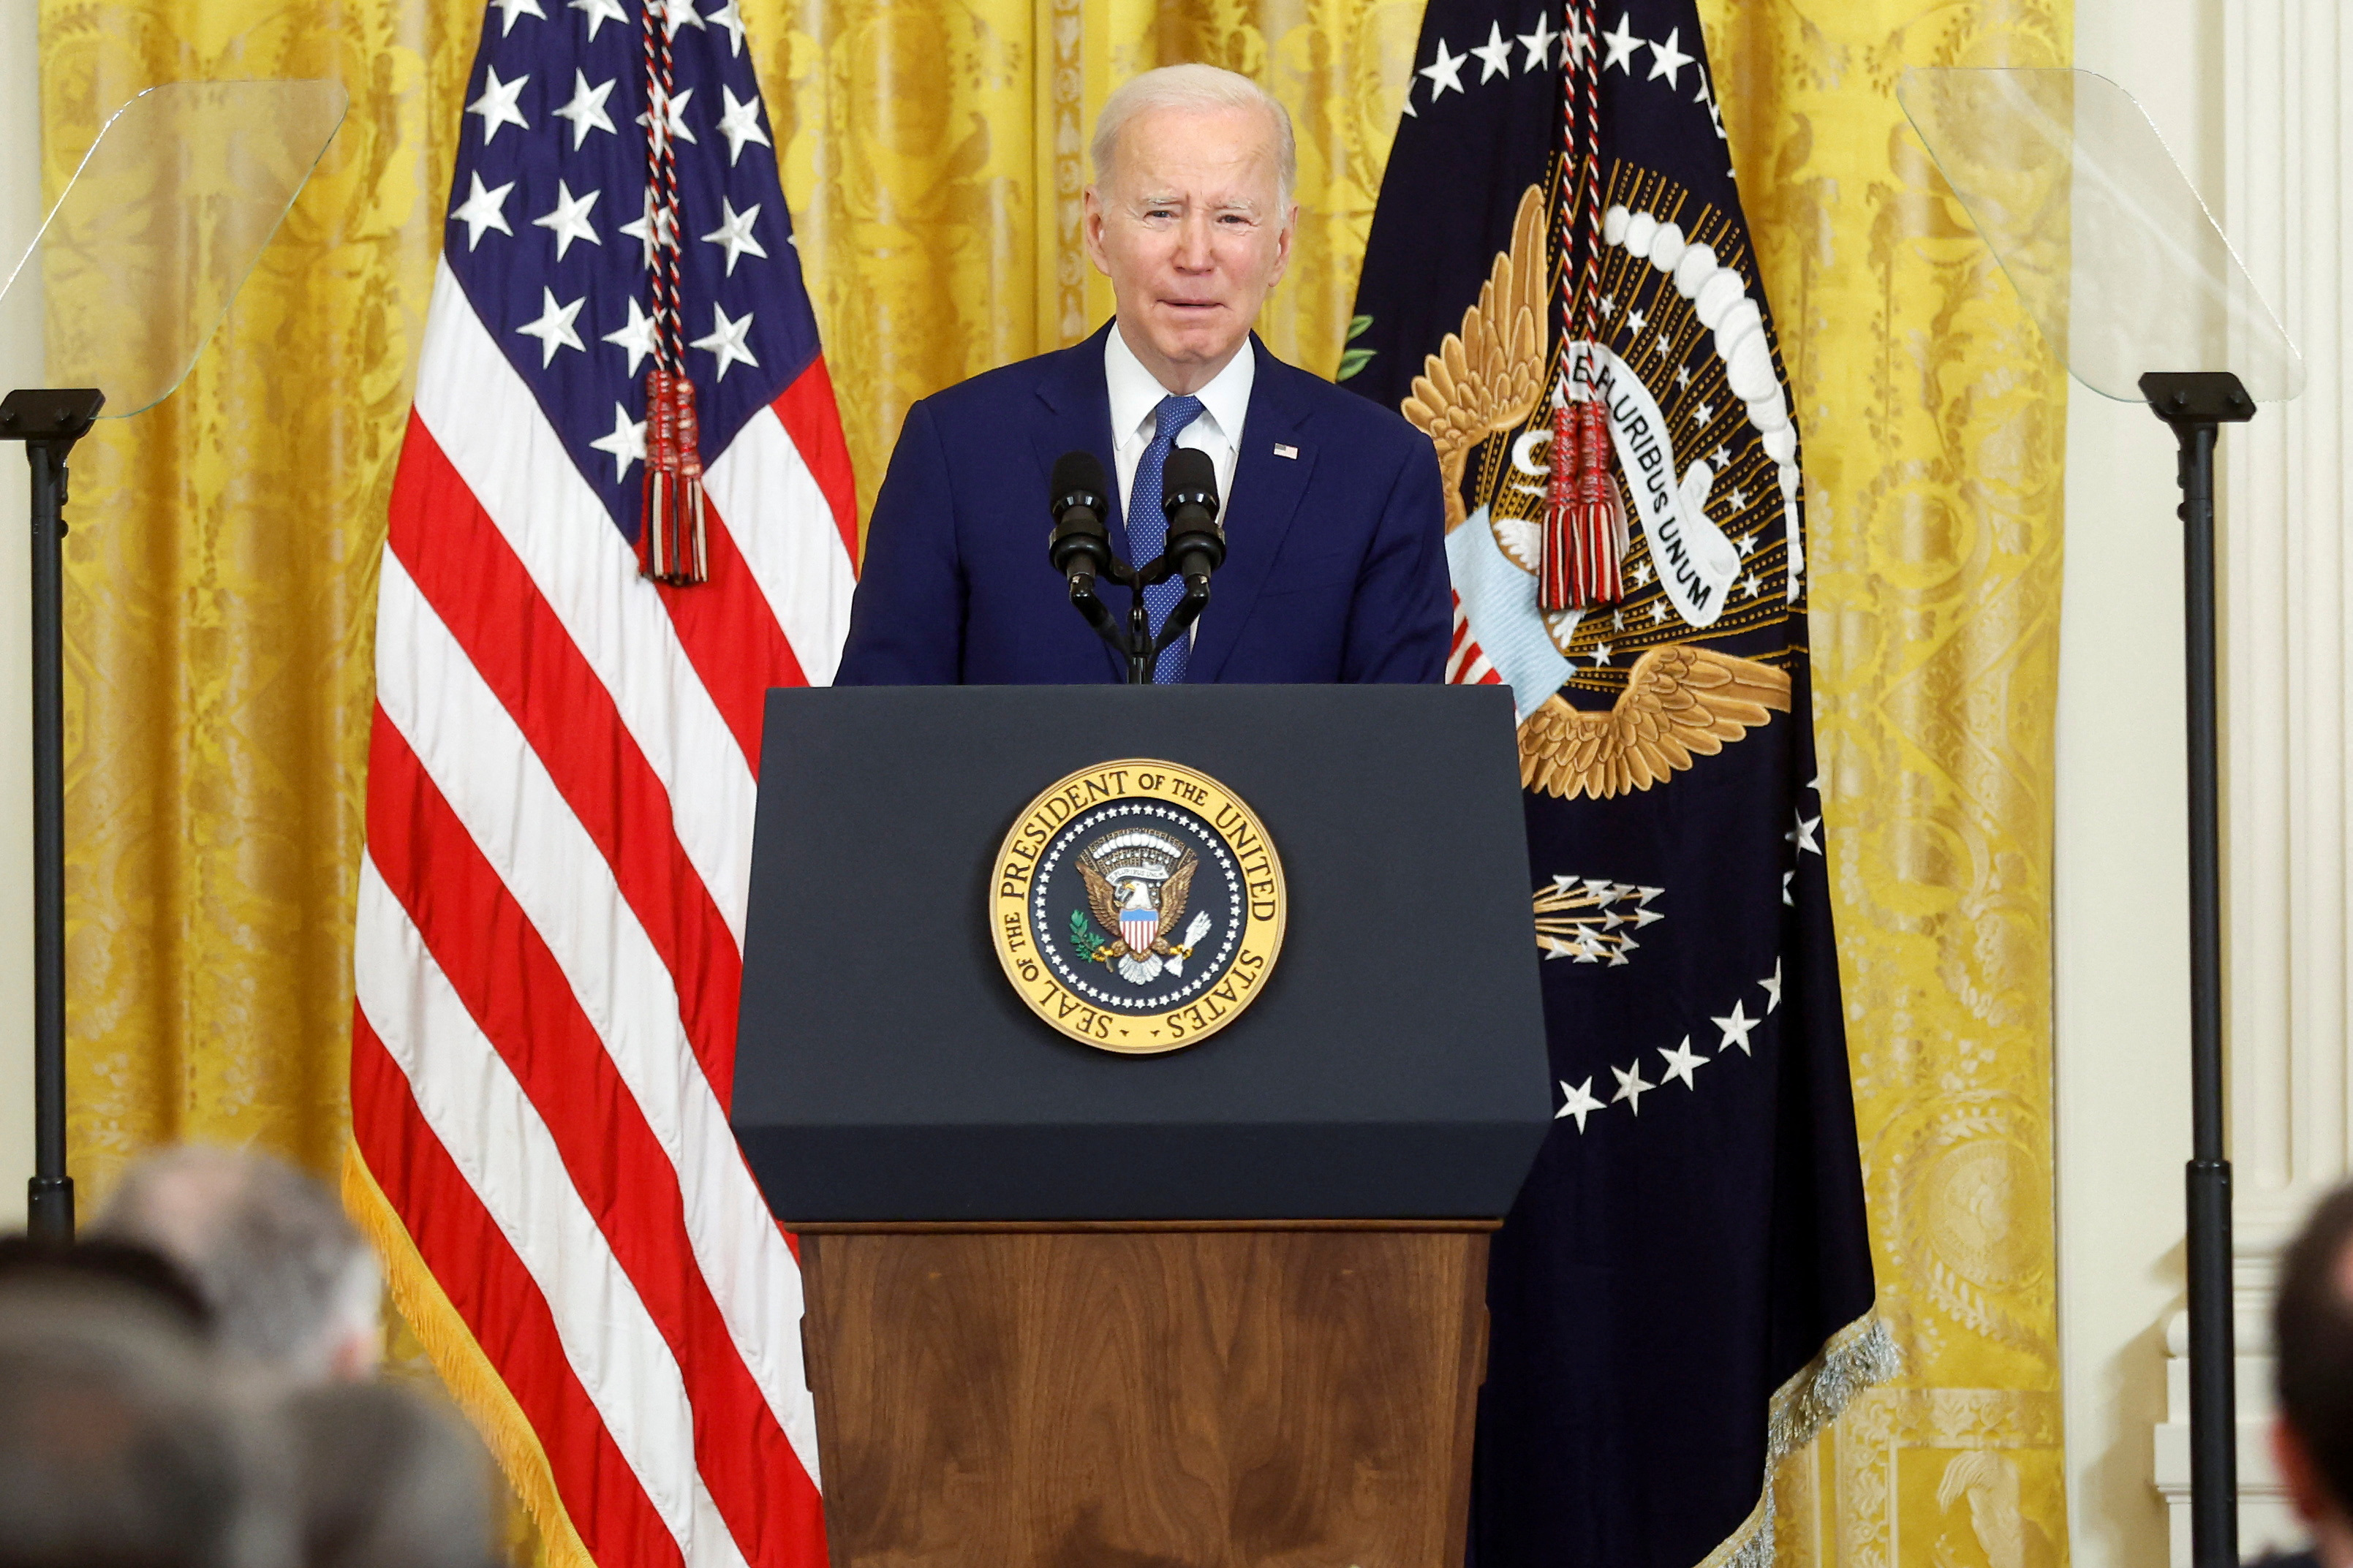 U.S. President Biden delivers remarks on the 13th anniversary of passage of the Affordable Care Act at the White House in Washington